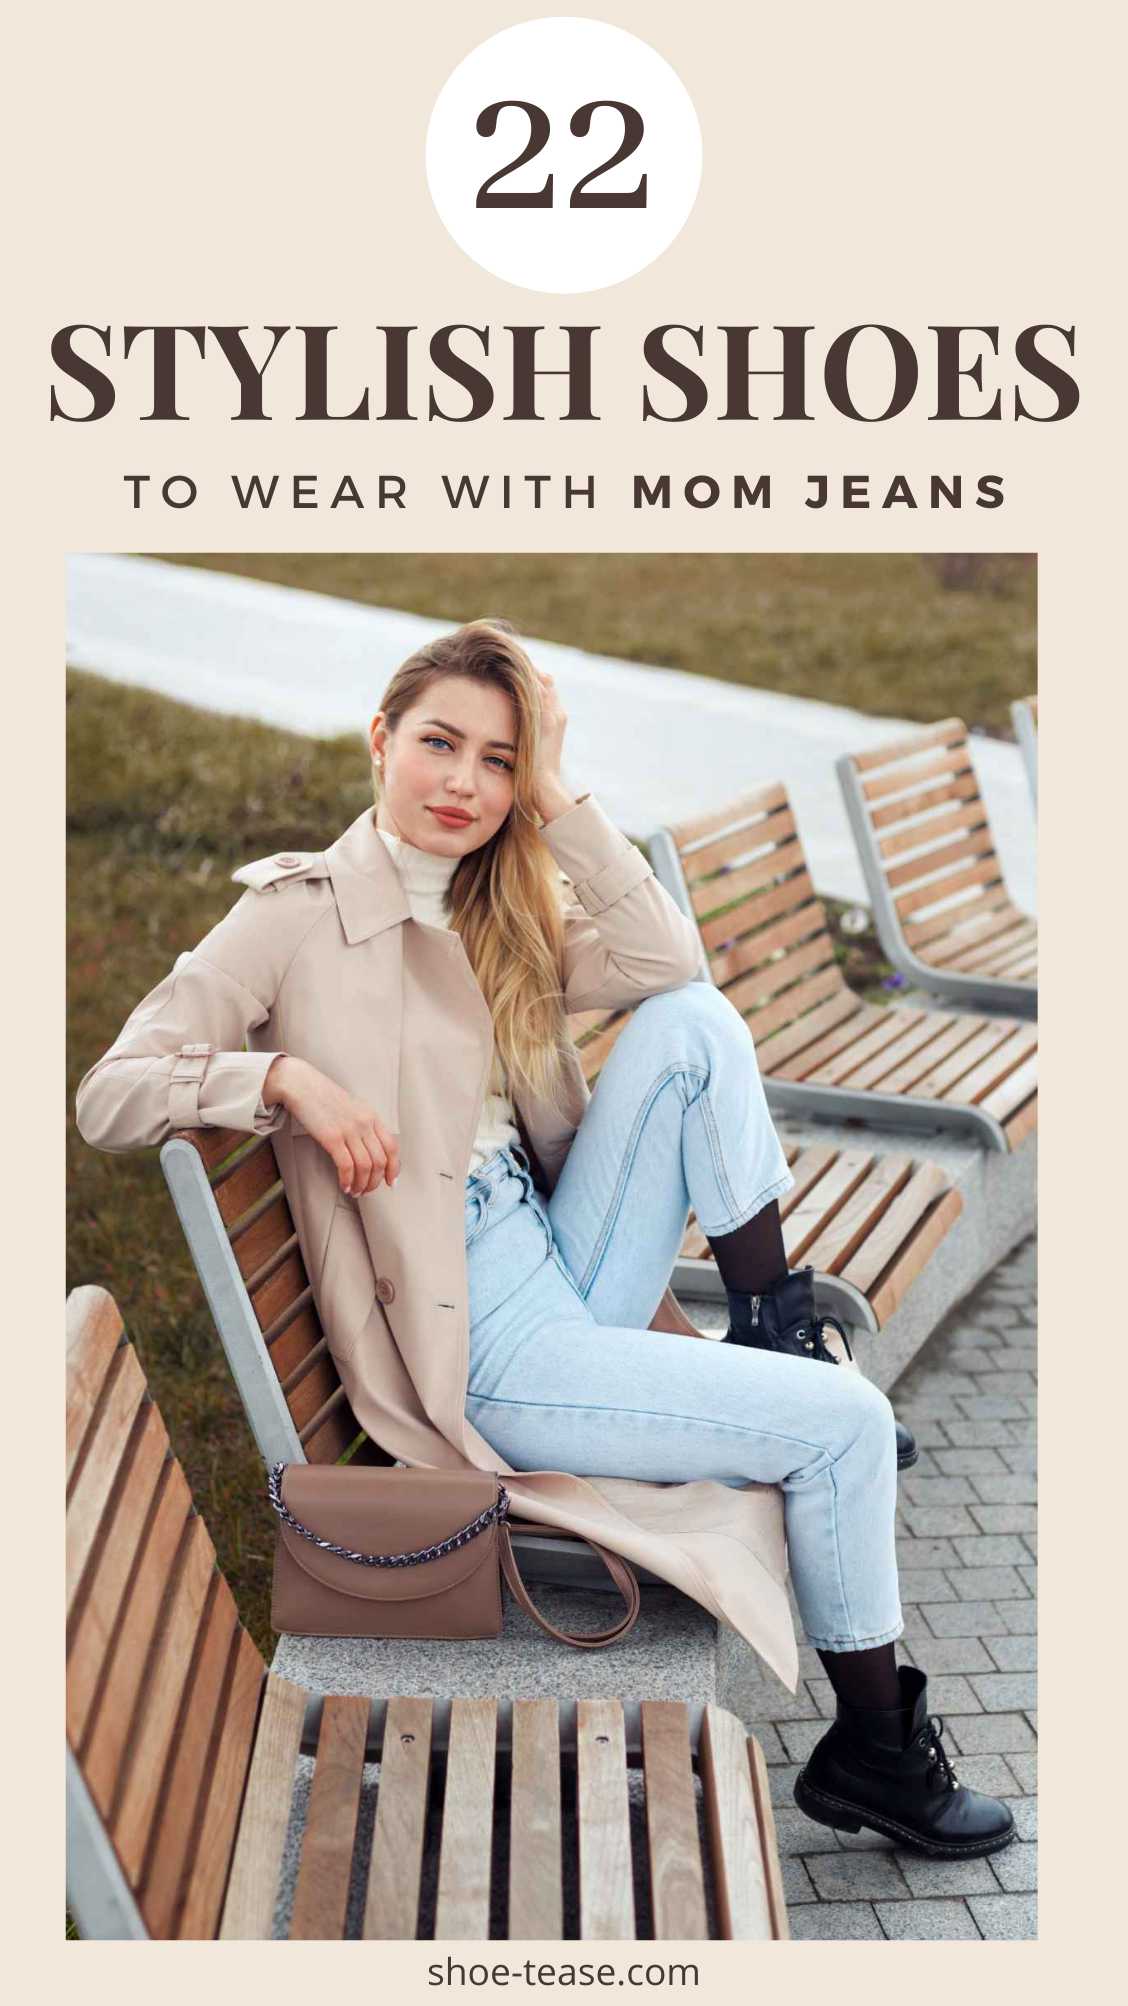 What Shoes to Wear with Mom Jeans Outfits to Look Stylish in 2021!